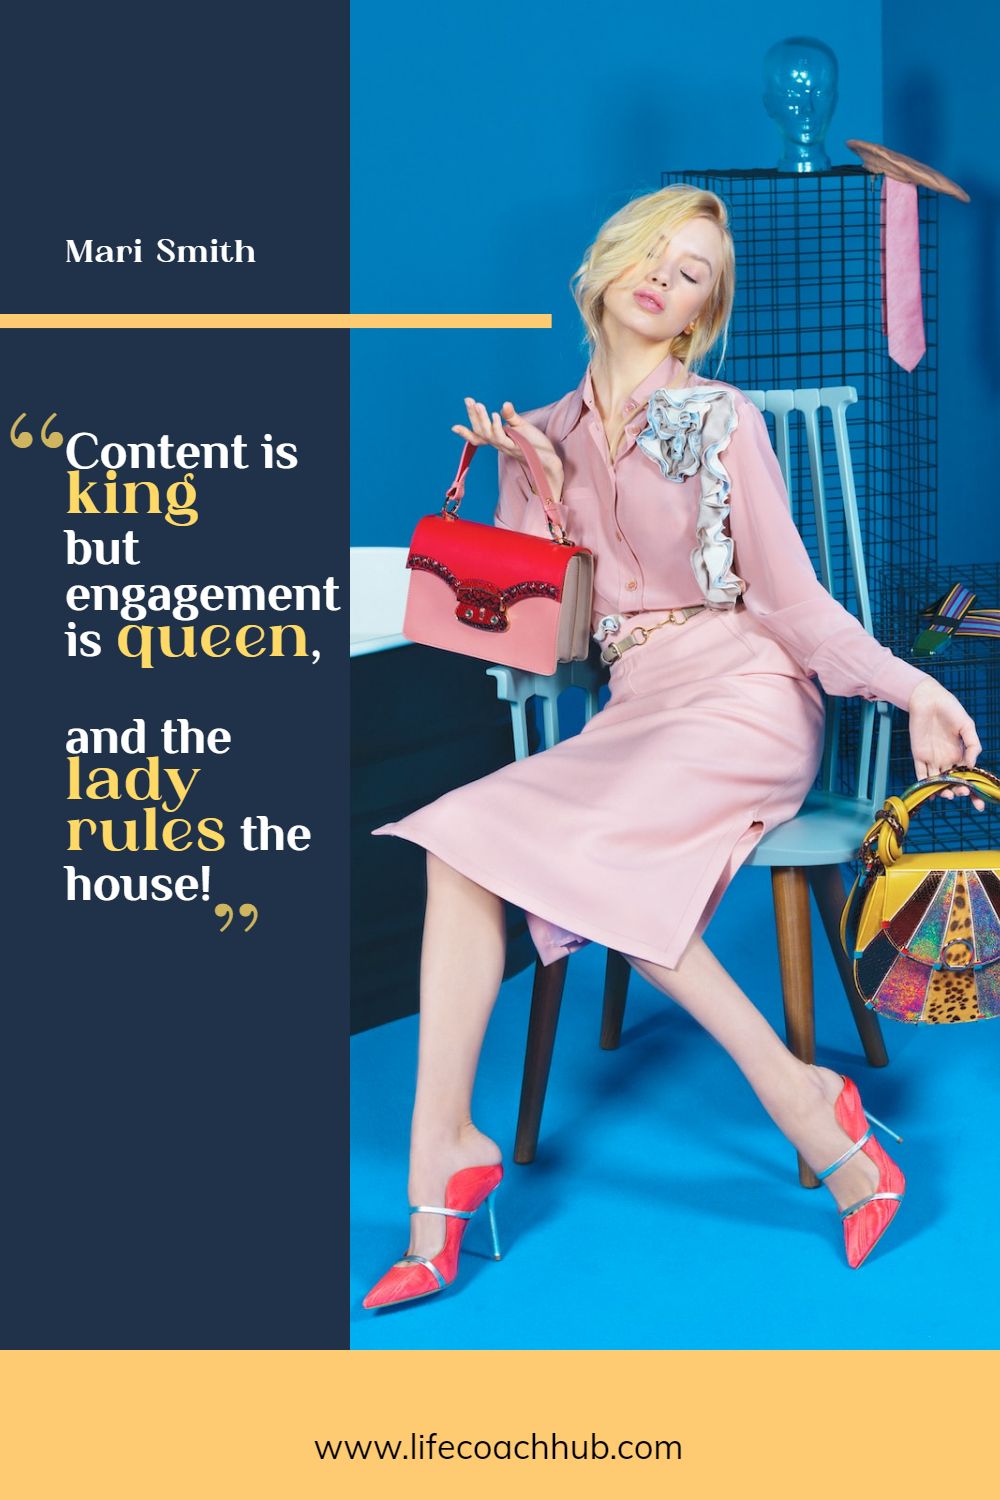 Content is king but engagement is queen, and the lady rules the house! Mari Smith Coaching Quote